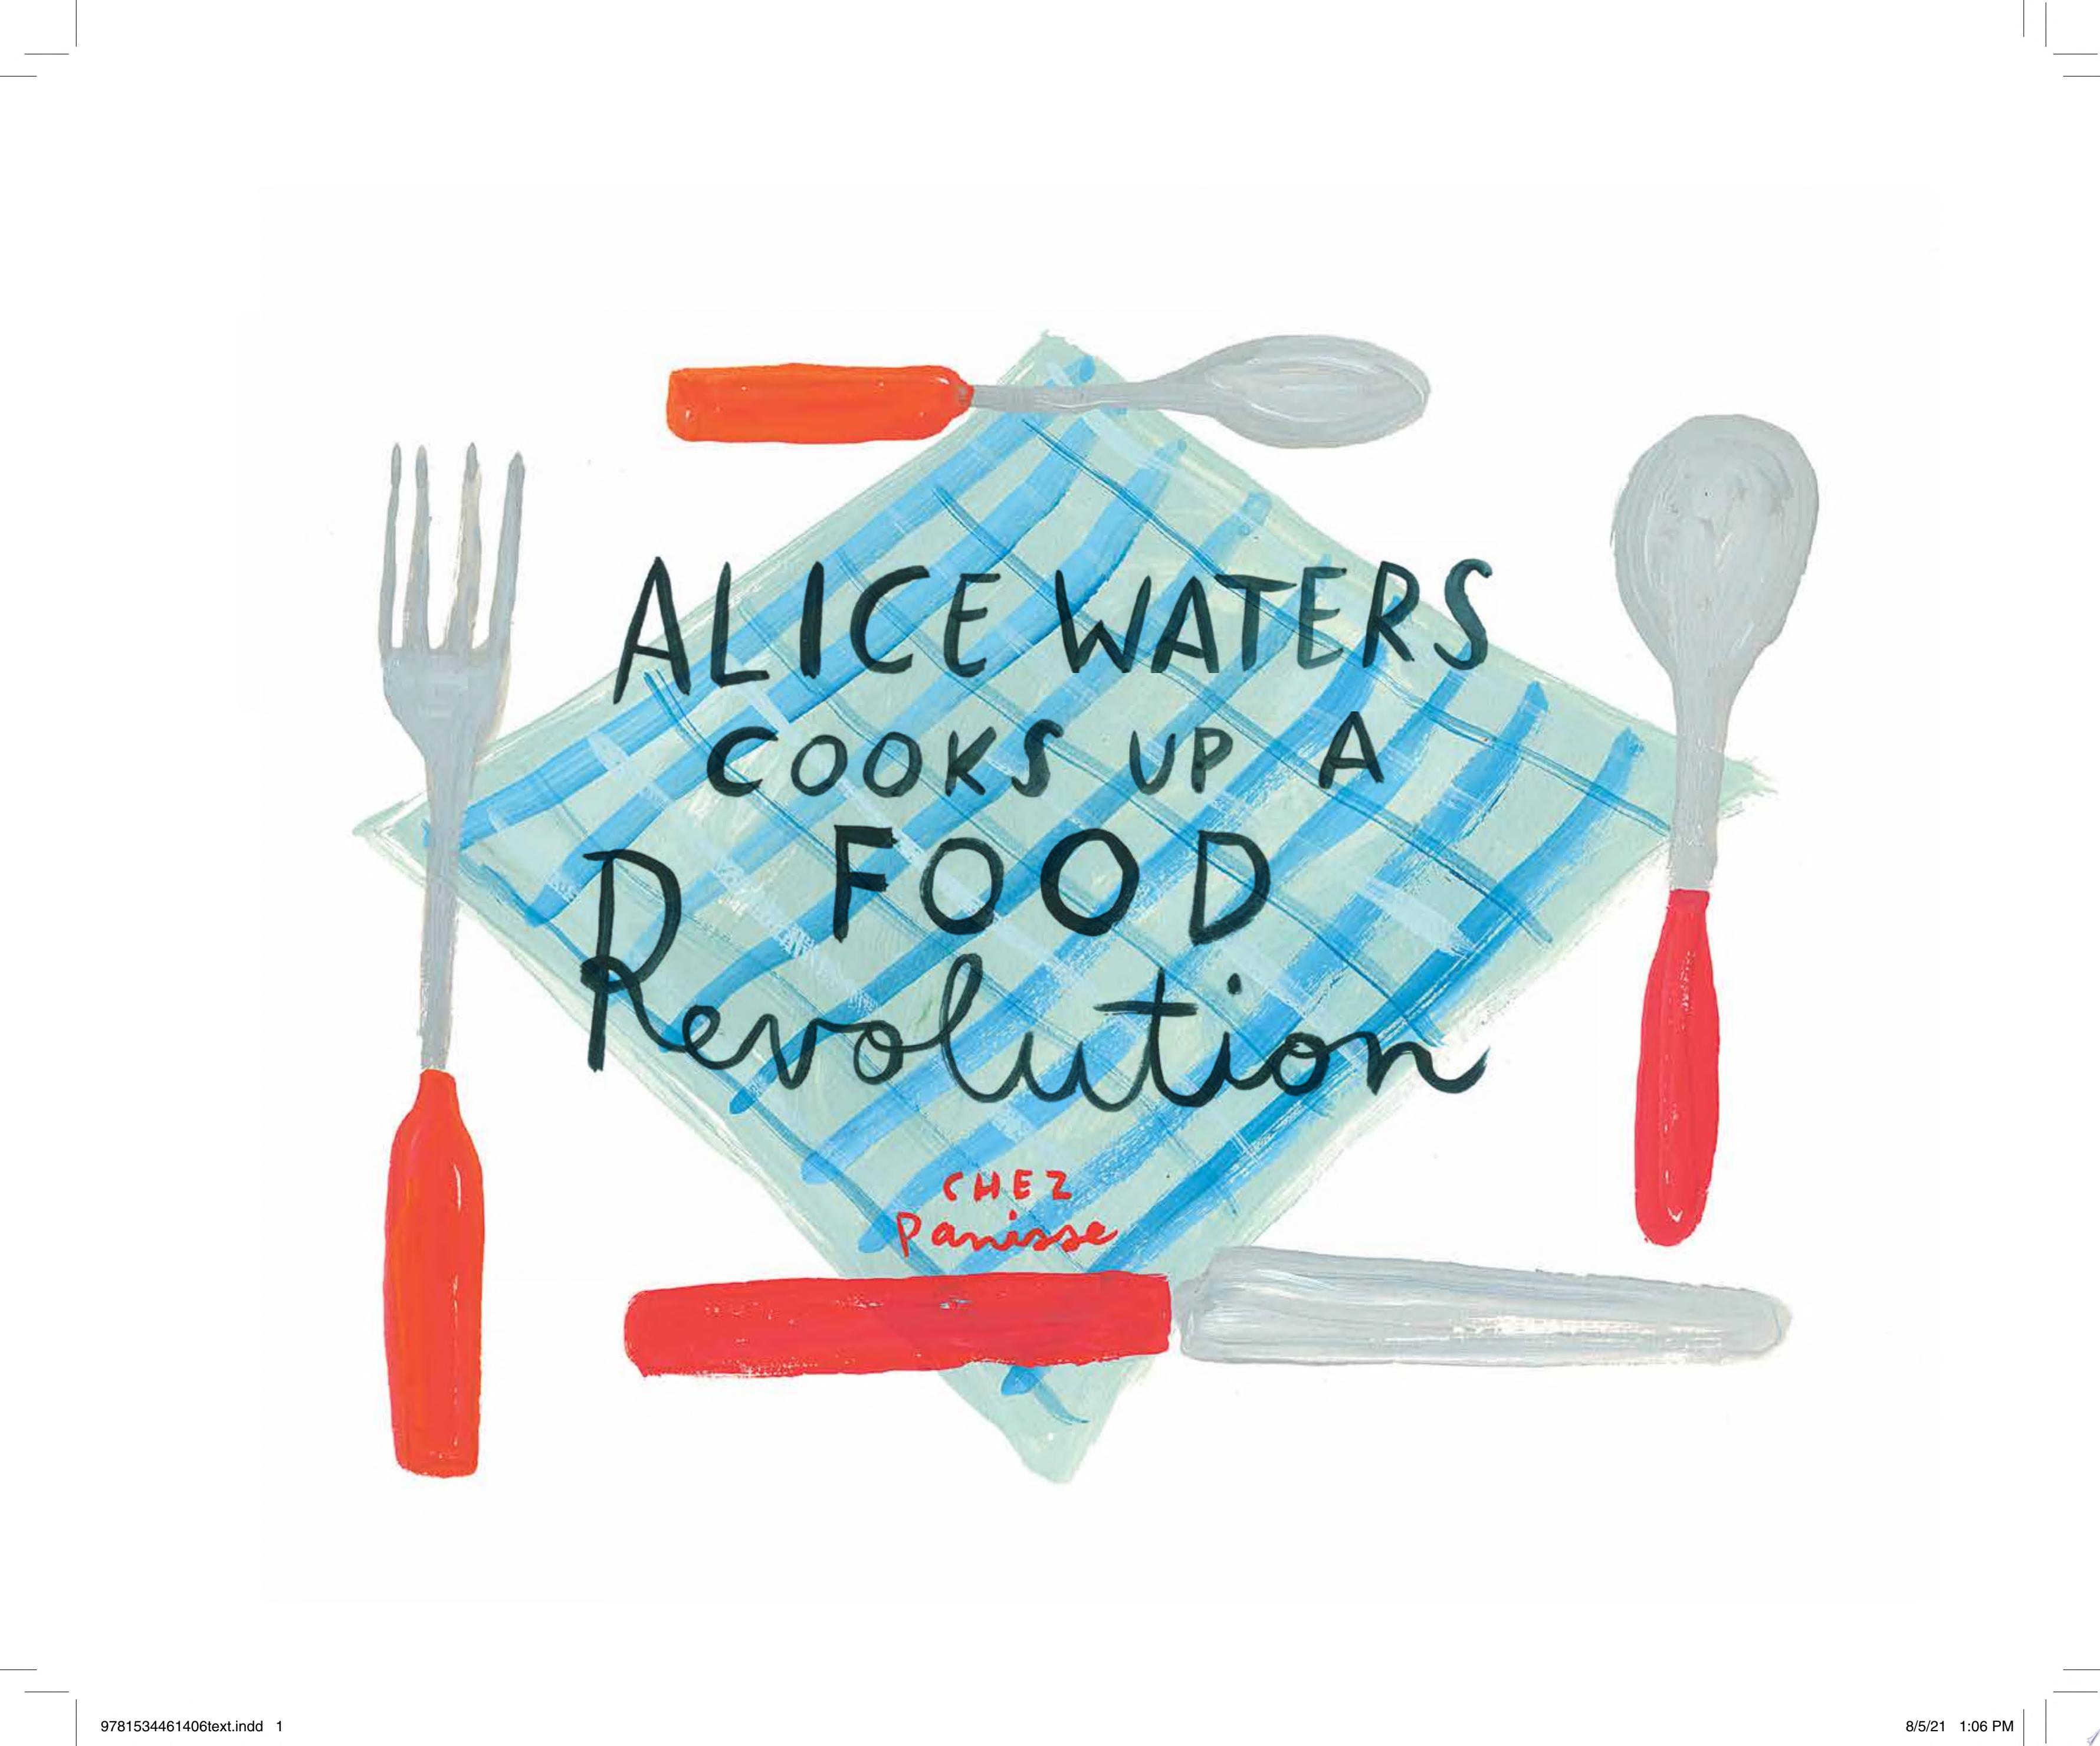 Image for "Alice Waters Cooks Up a Food Revolution"